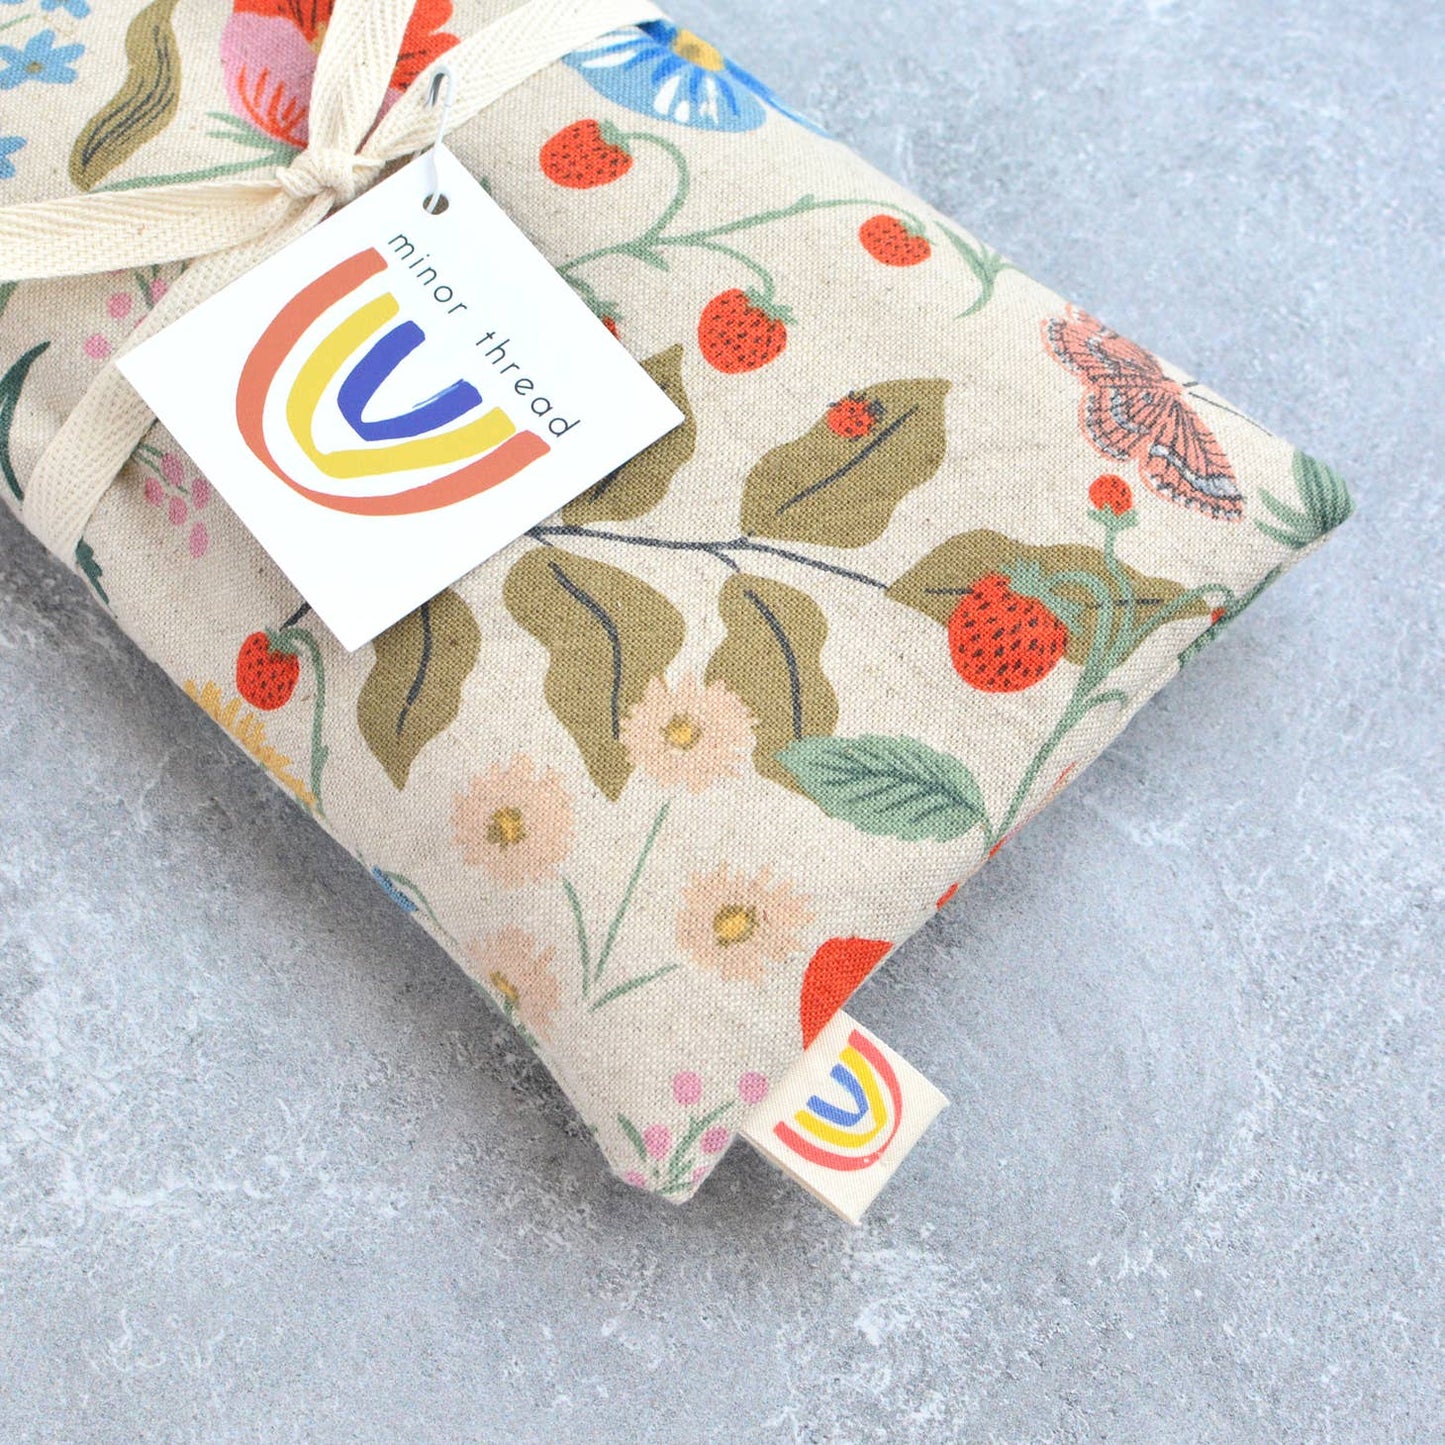 Lavender Weighted Oversized Eye Pillow- Strawberry Fields